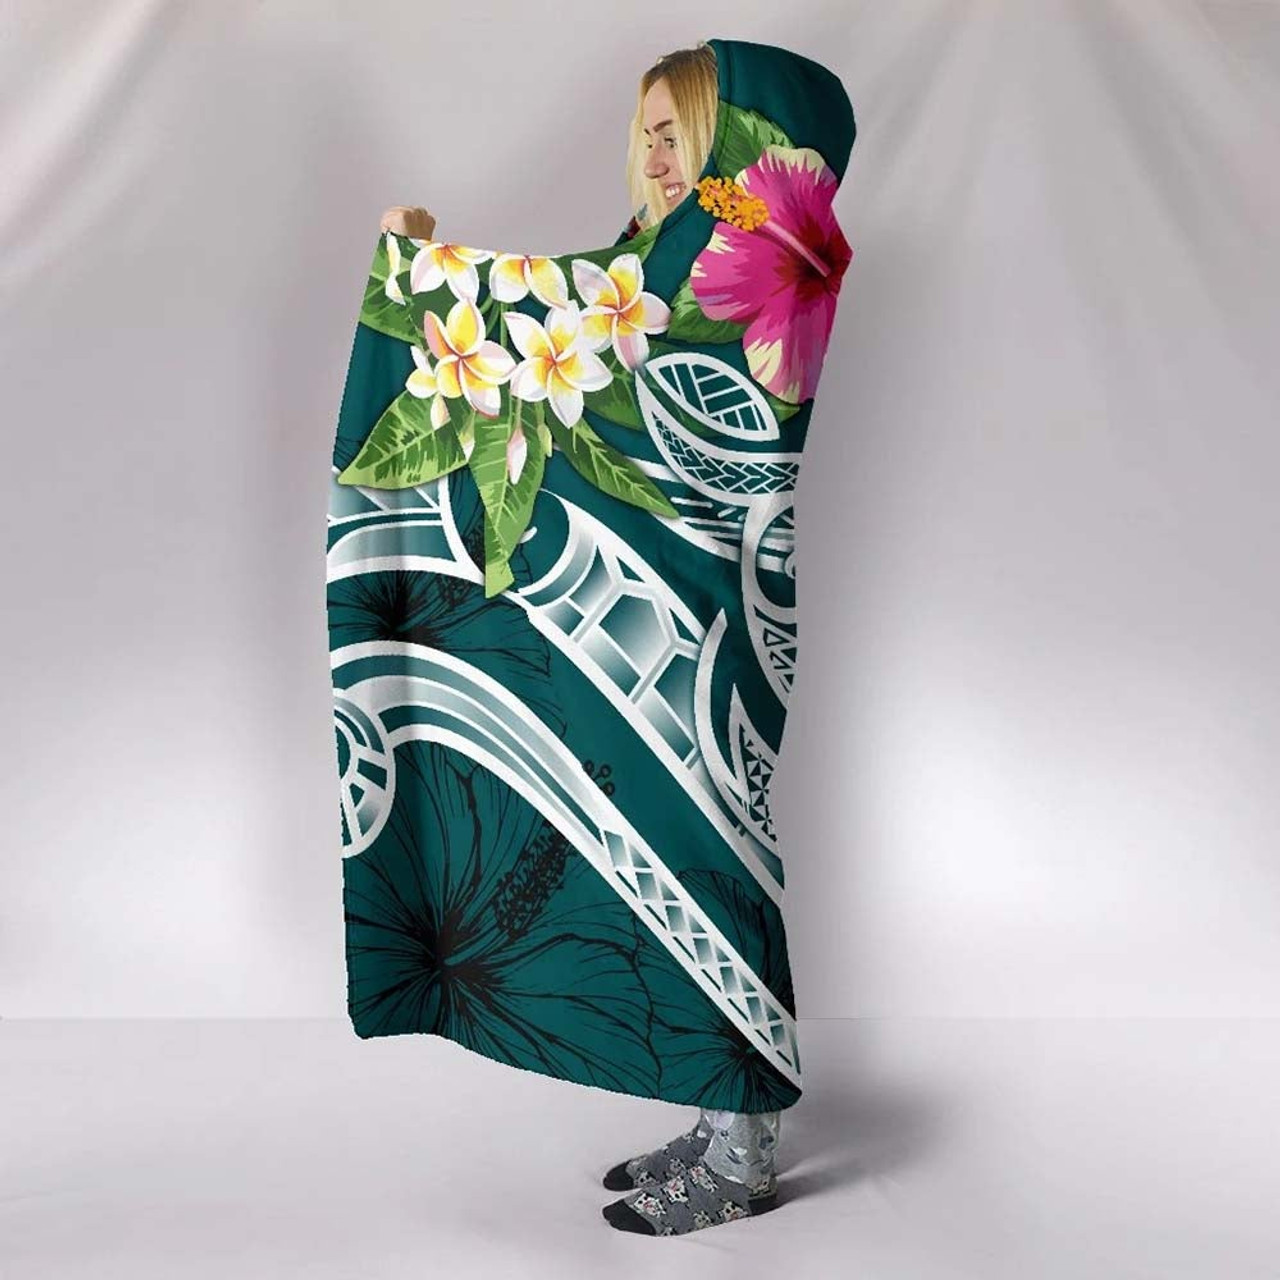 Federated States Of Micronesia Polynesian Hooded Blanket - Summer Plumeria (Turquoise) 4